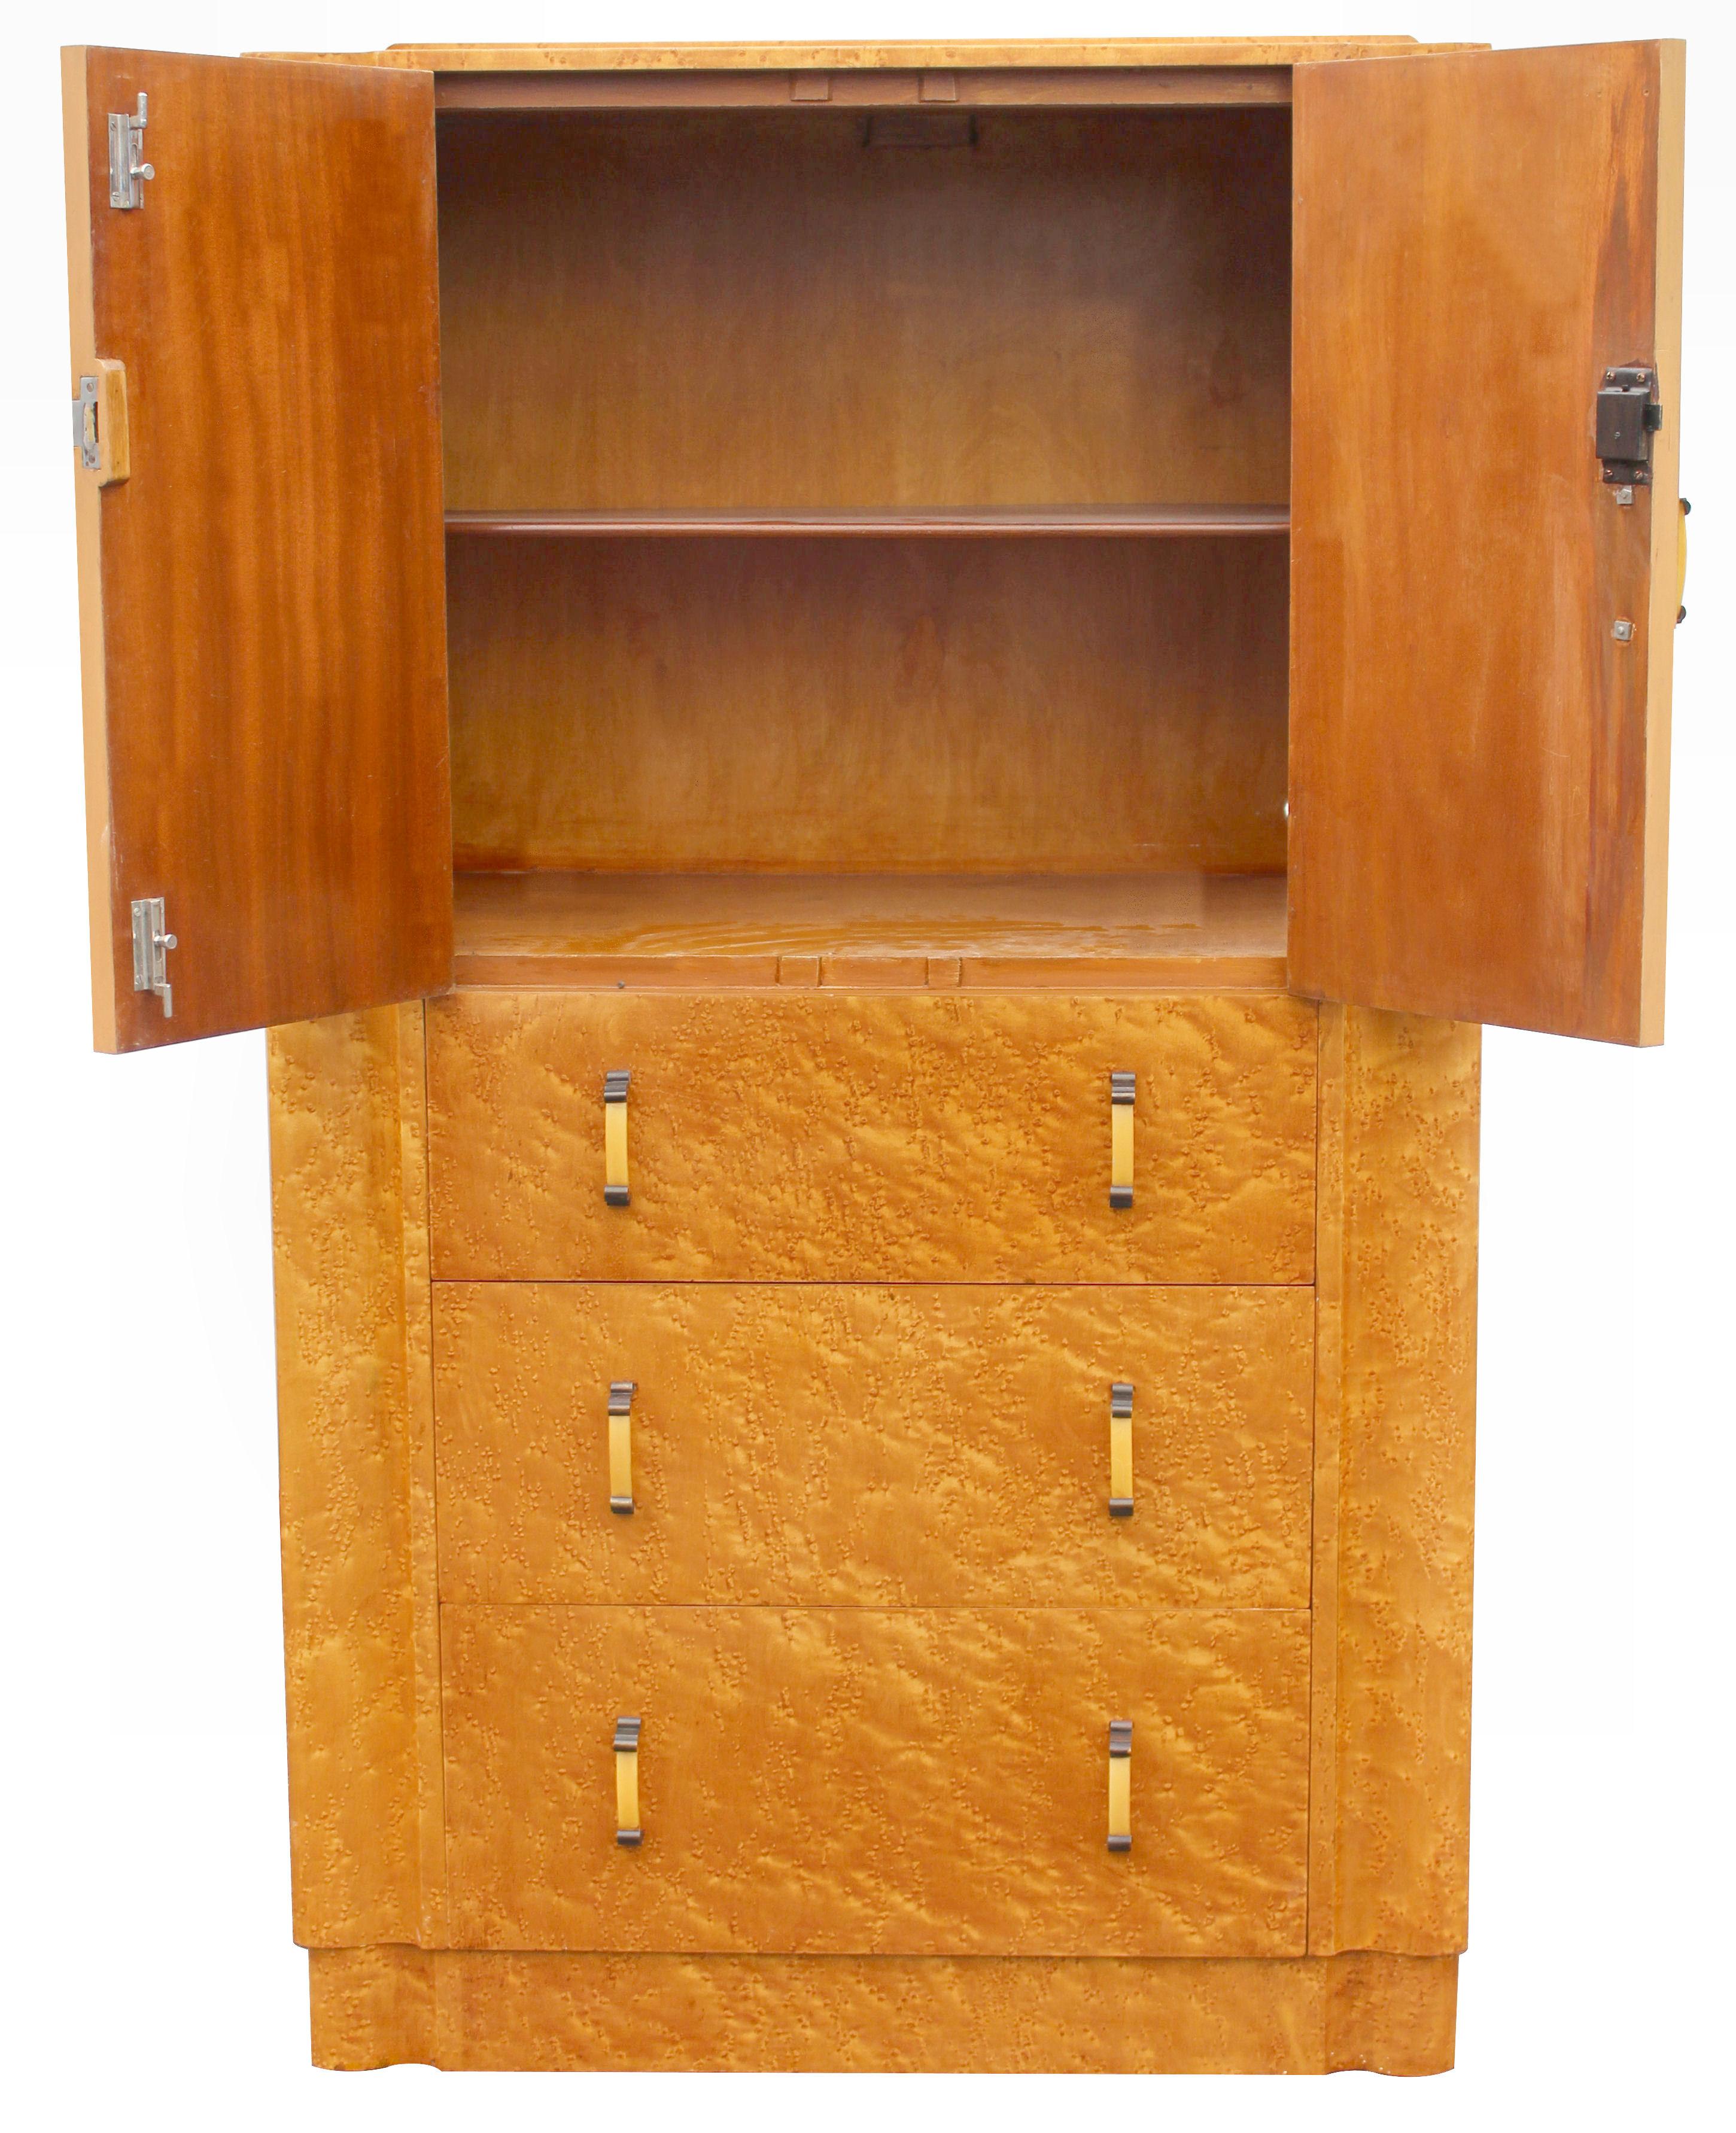 For your consideration is this English Art Deco blonde birds eye maple two-door, three drawer single-piece tallboy, circa 1930 and in excellent original condition. Not only does this tallboy look the part but it's extremely useful too having a very